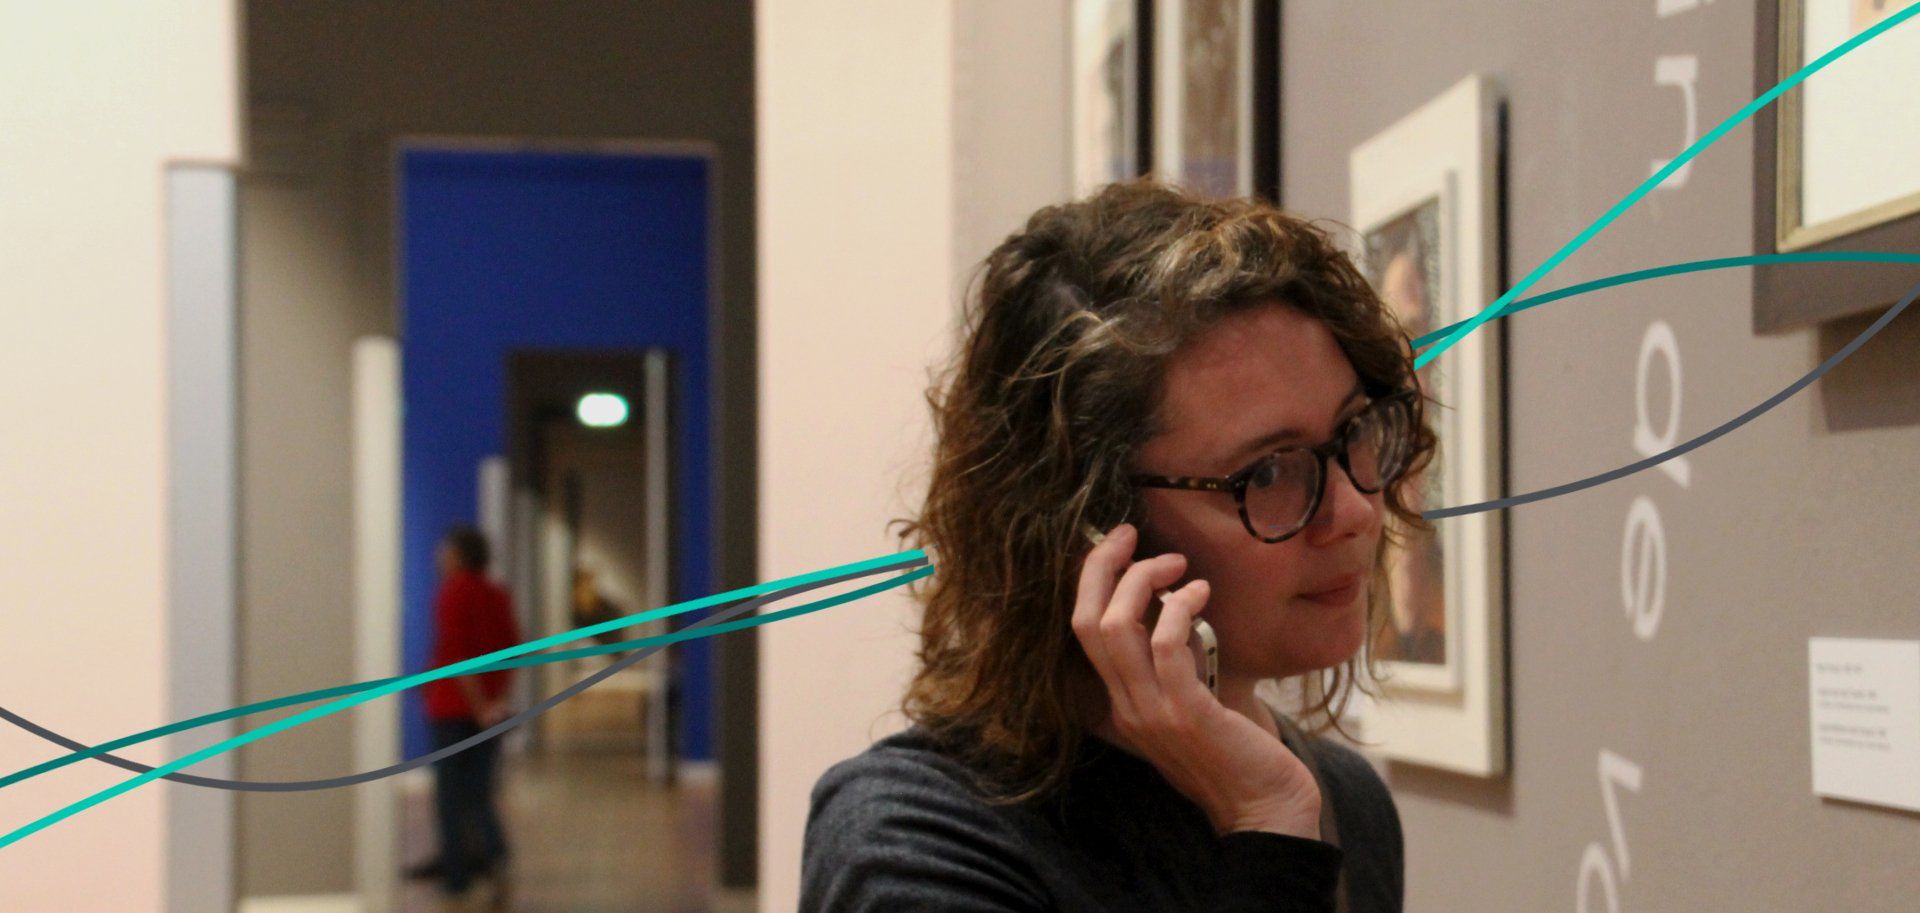 A woman listening to an audio guide in a museum with paintings on the wall and green lines flowing through the photo